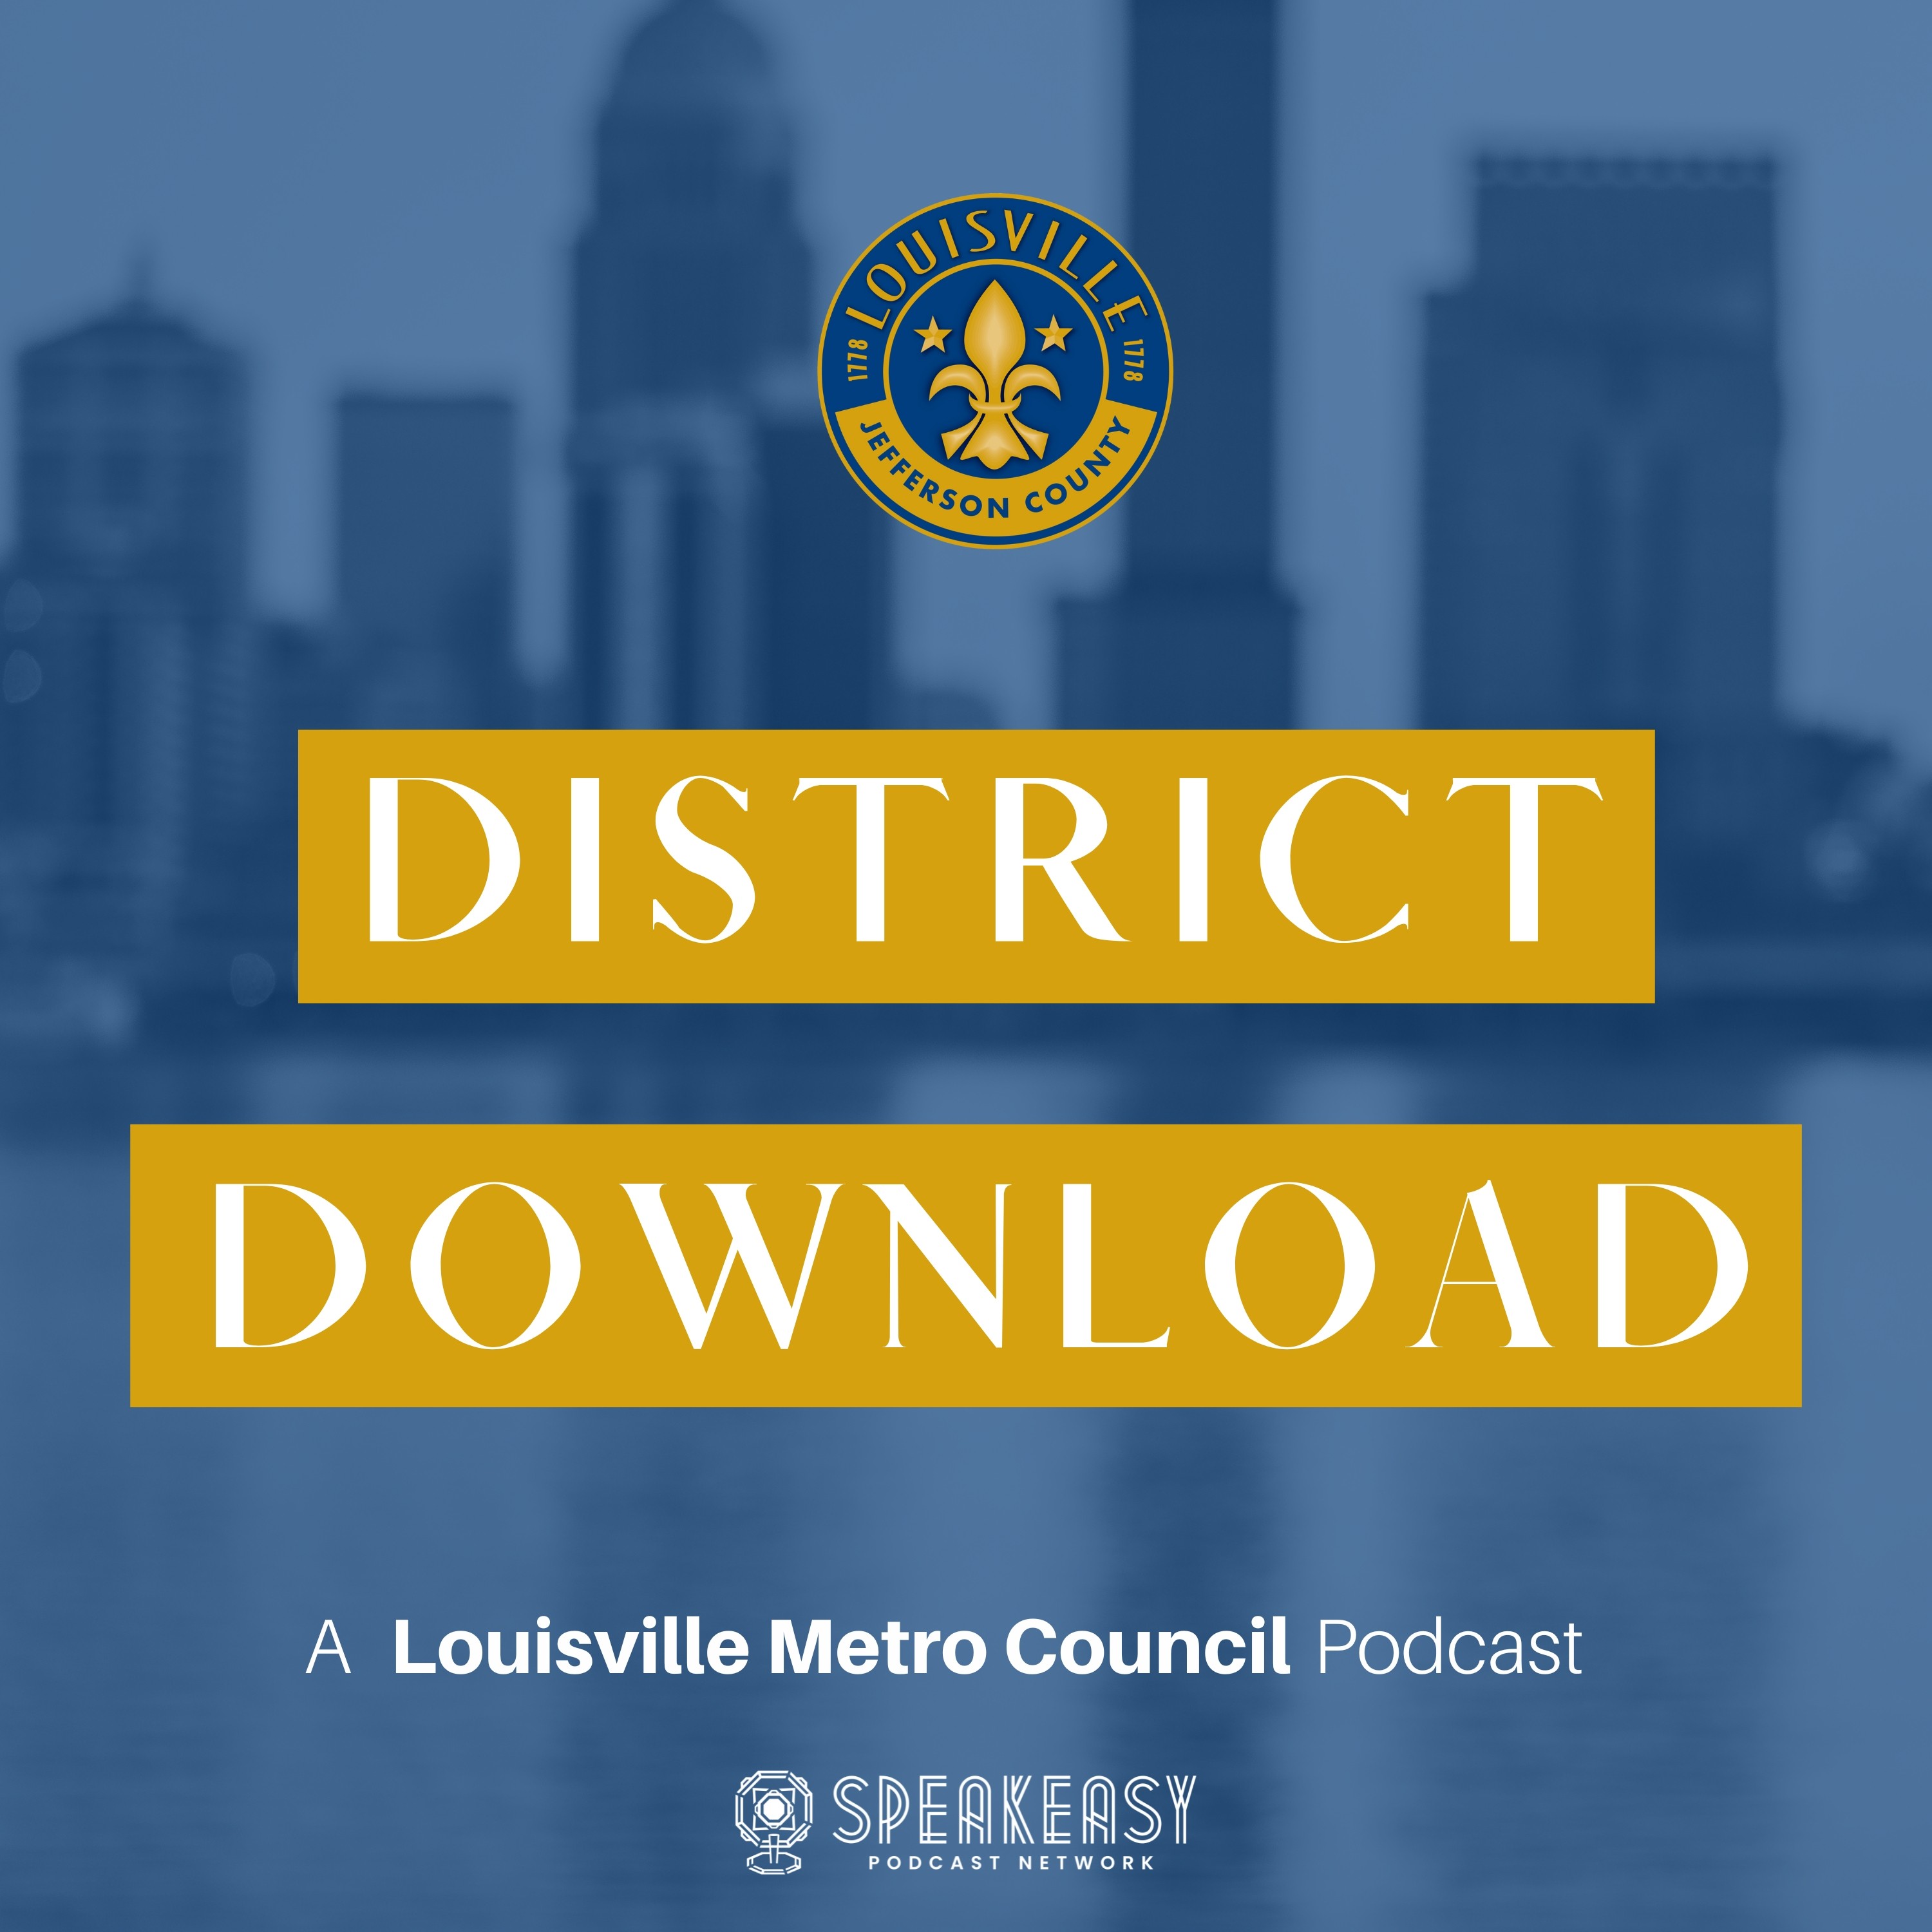 District Download - A Louisville Metro Council Podcast